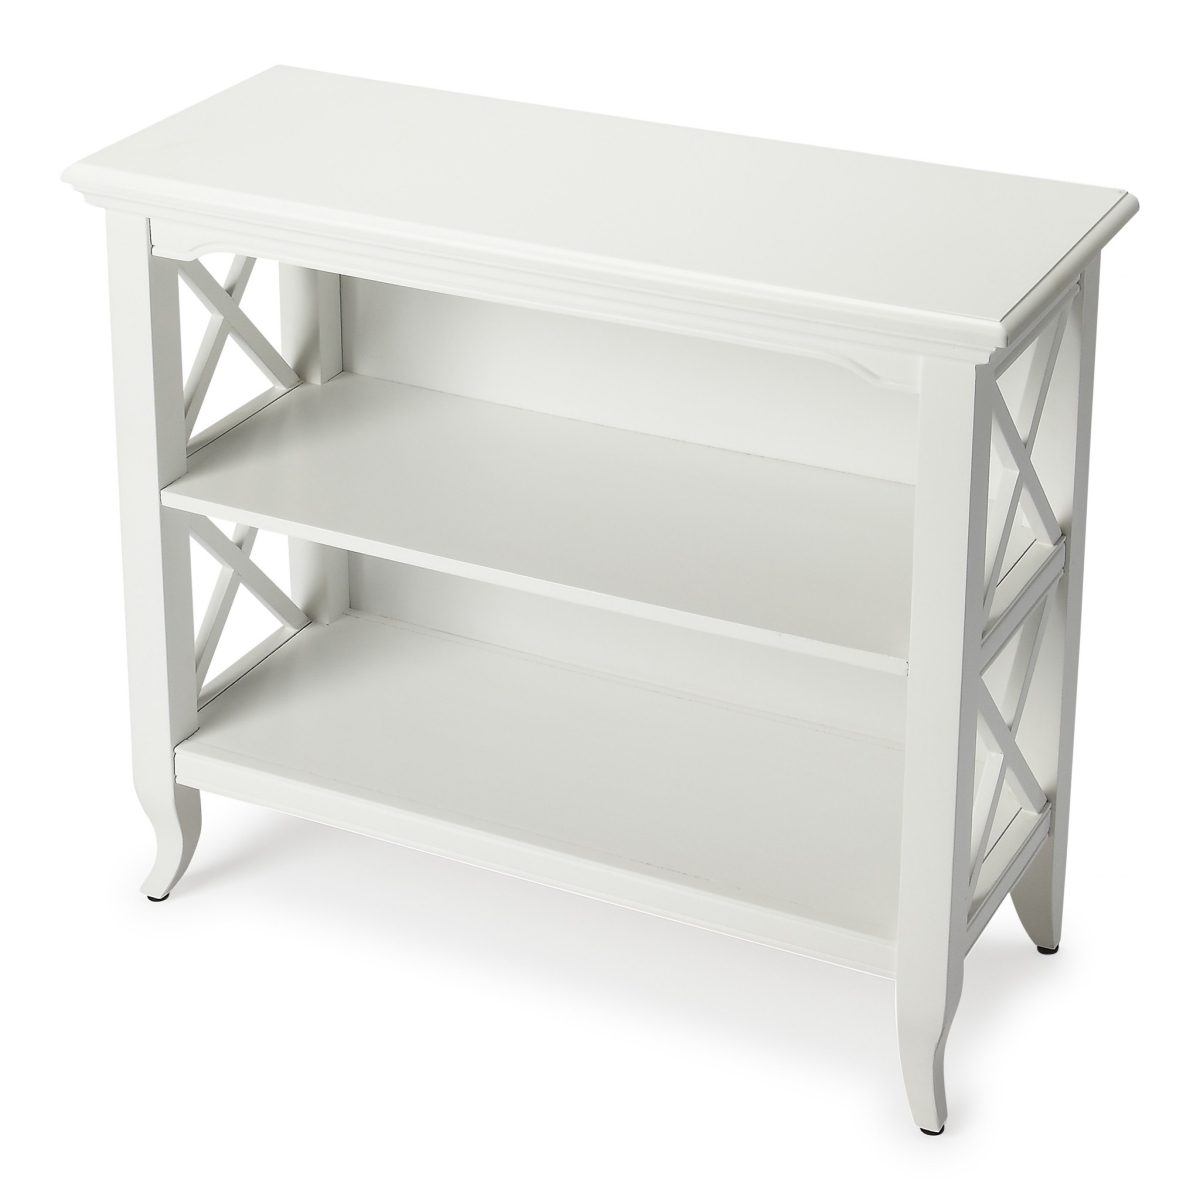 Picture of HomeRoots 389557 30.25 x 32 x 13 in. Newport Glossy White Low Bookcase